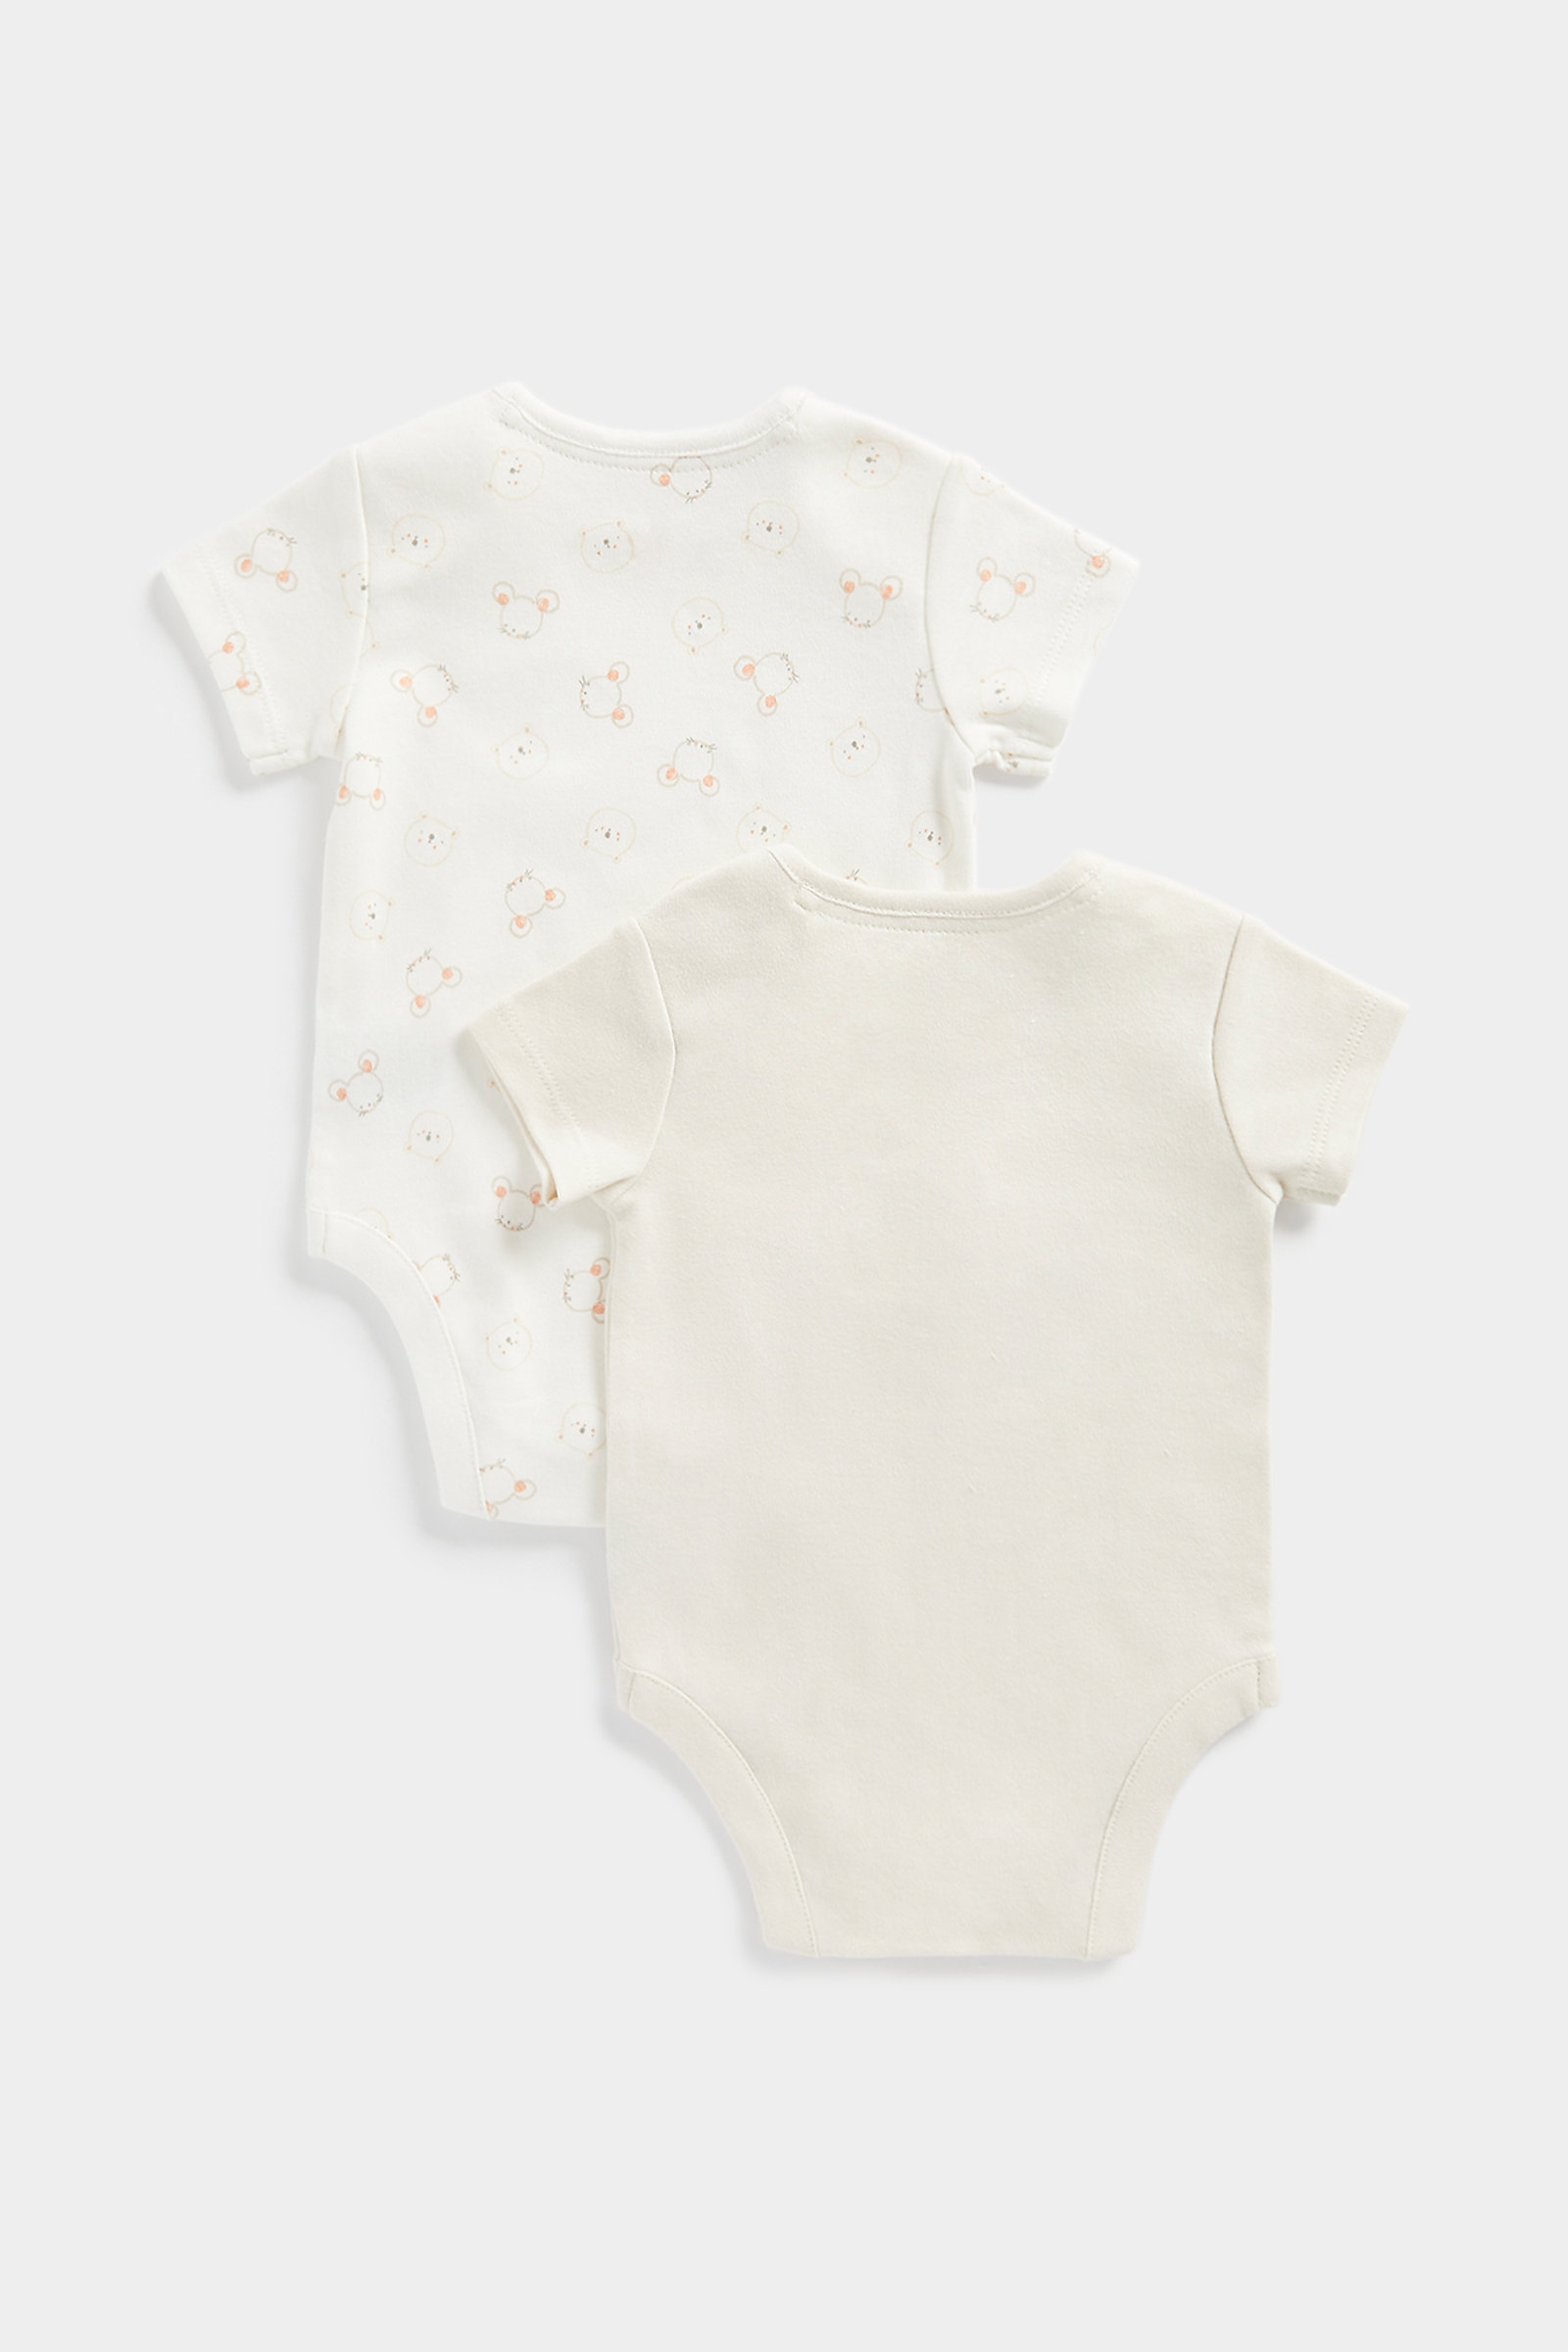 Mothercare Boys Half Sleeves My First Collection Bodysuit-Pack of 2-Cream